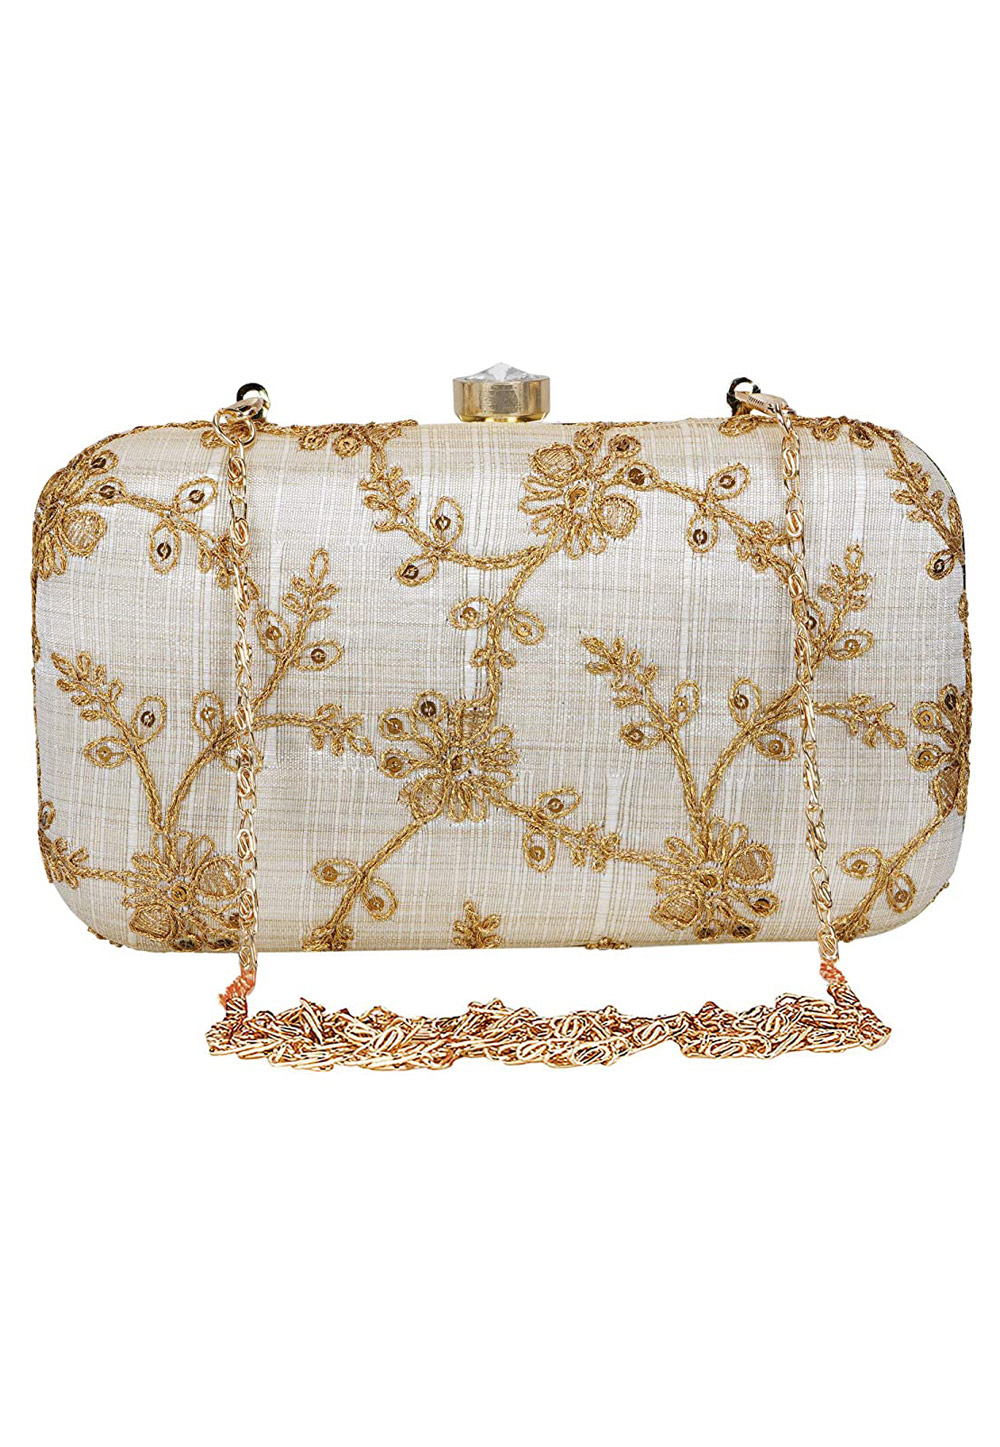 Off White Synthetic Embroidered Clutch 225772